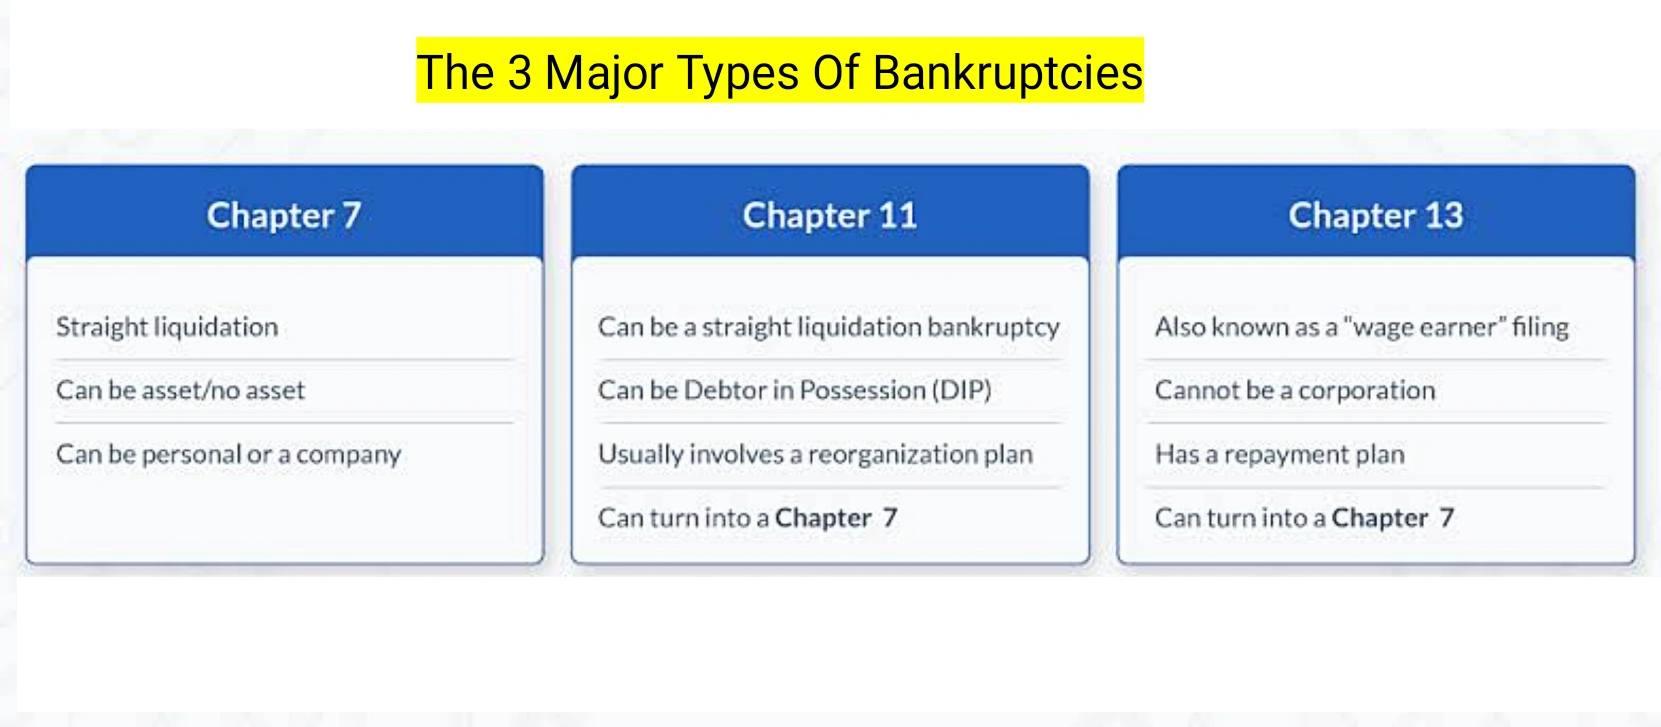 The 3 Major Types Of Bankruptcies